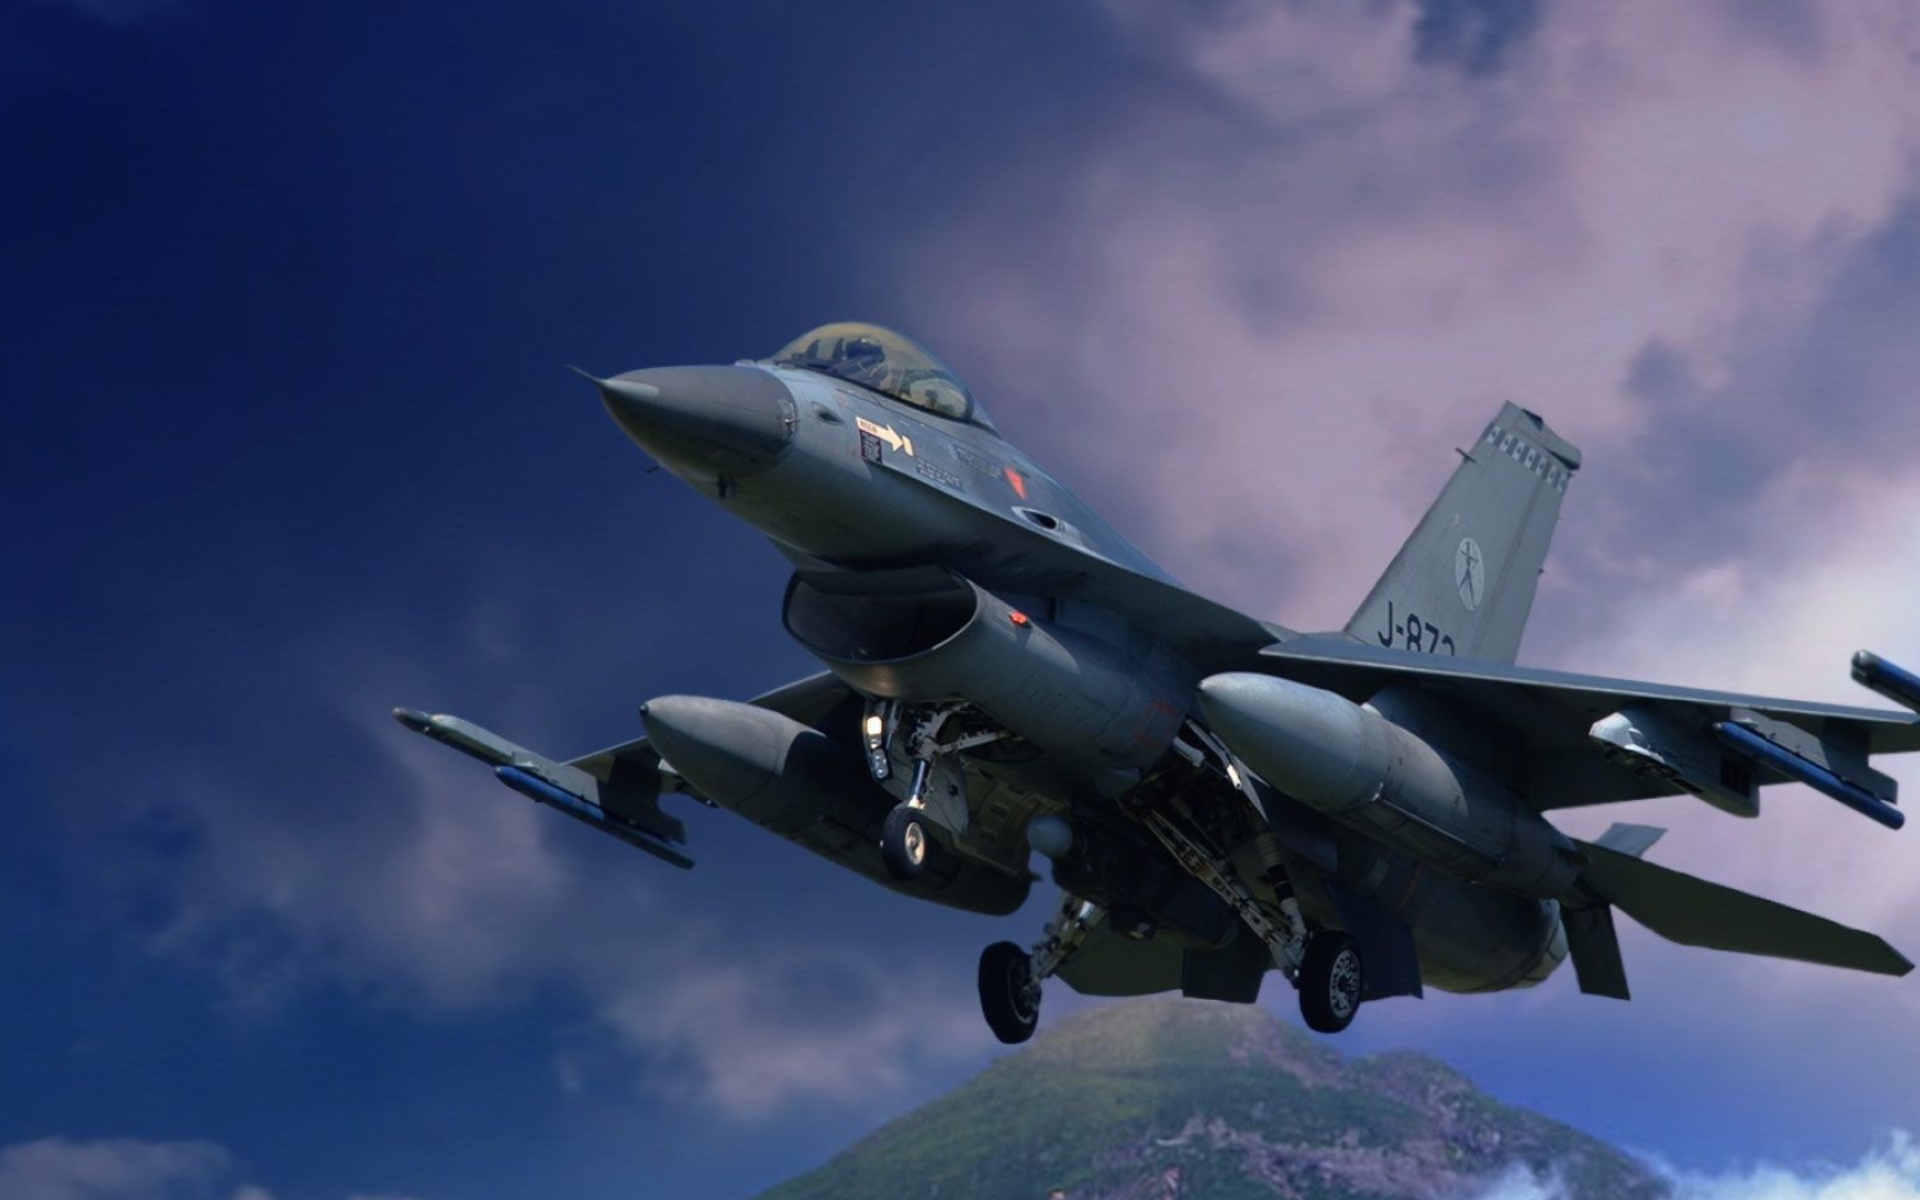 Saab Airplane, Agile fighter jets, Speed and precision, Aerial combat, 1920x1200 HD Desktop